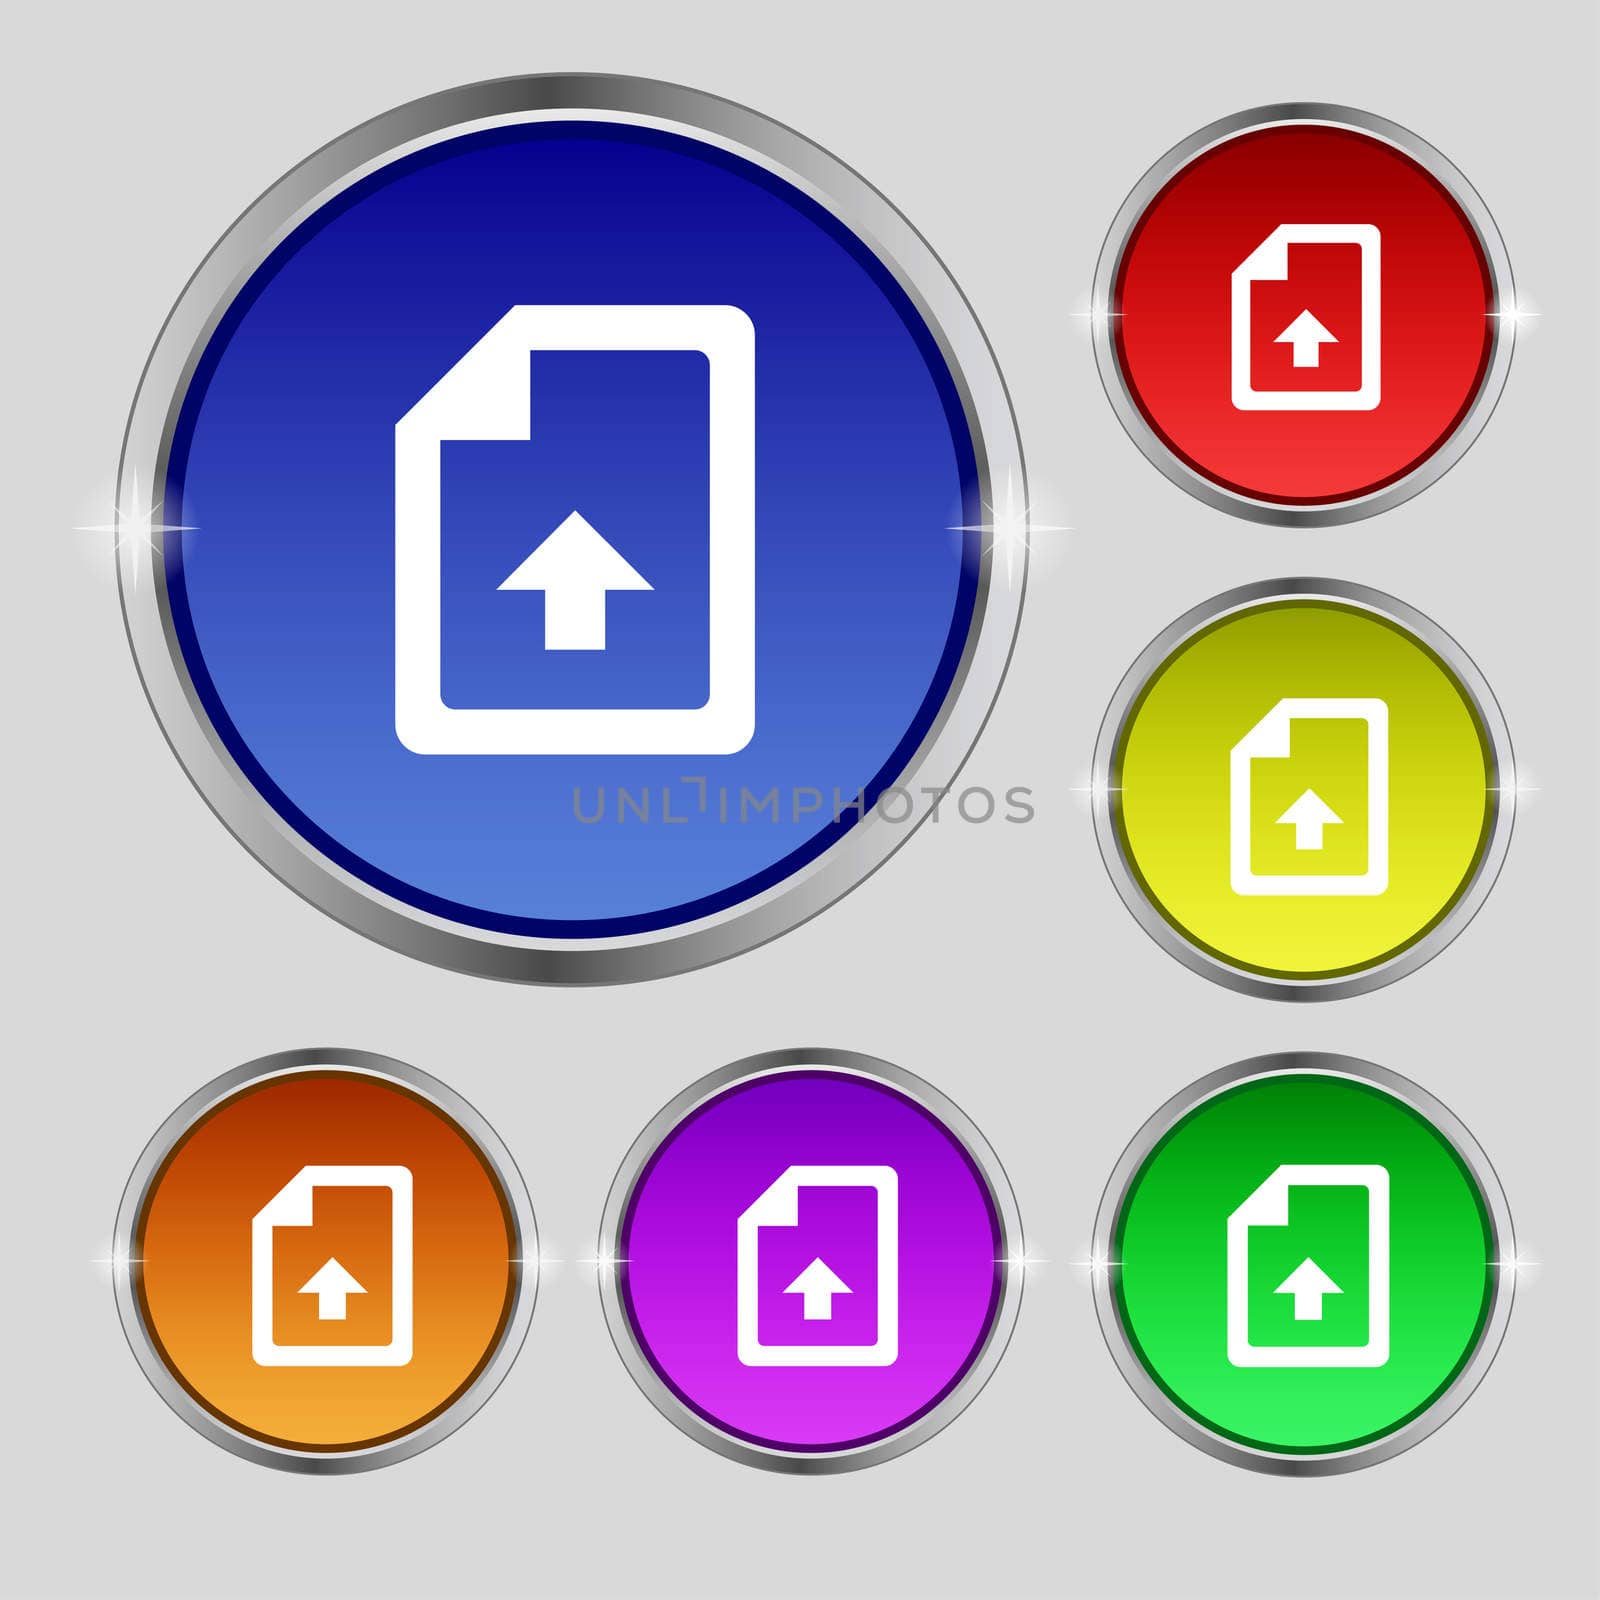 Export, Upload file icon sign. Round symbol on bright colourful buttons.  by serhii_lohvyniuk